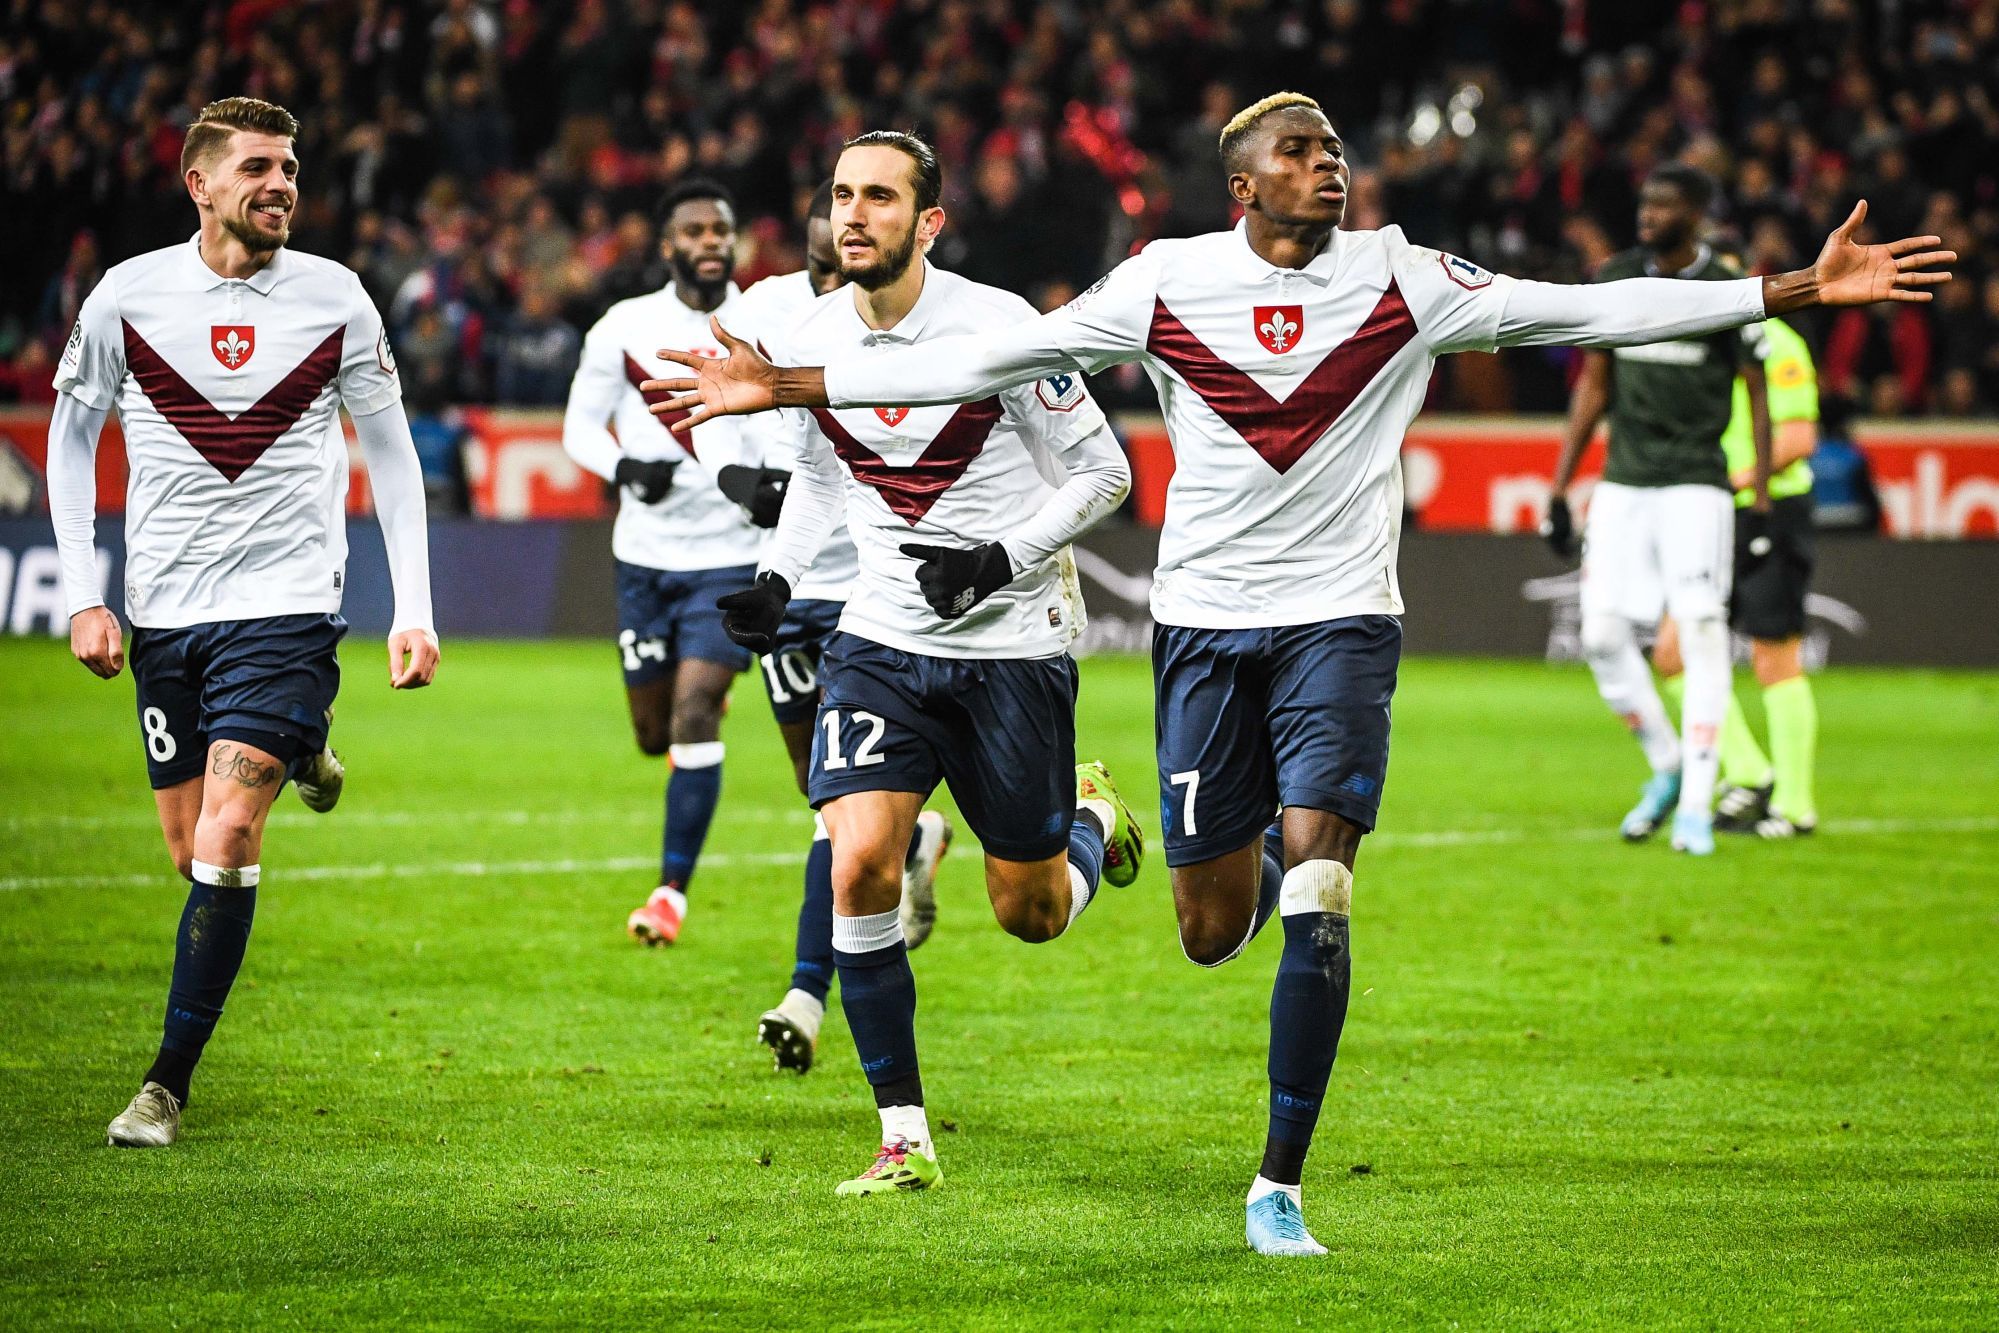 Victor OSIMHEN of Lille during the Ligue 1 match between Lille and Dijon at Grand Stade Lille Métropole on November 30, 2019 in Lille, France. (Photo by Matthieu Mirville/Icon Sport) - Stade Pierre Mauroy - Lille (France)